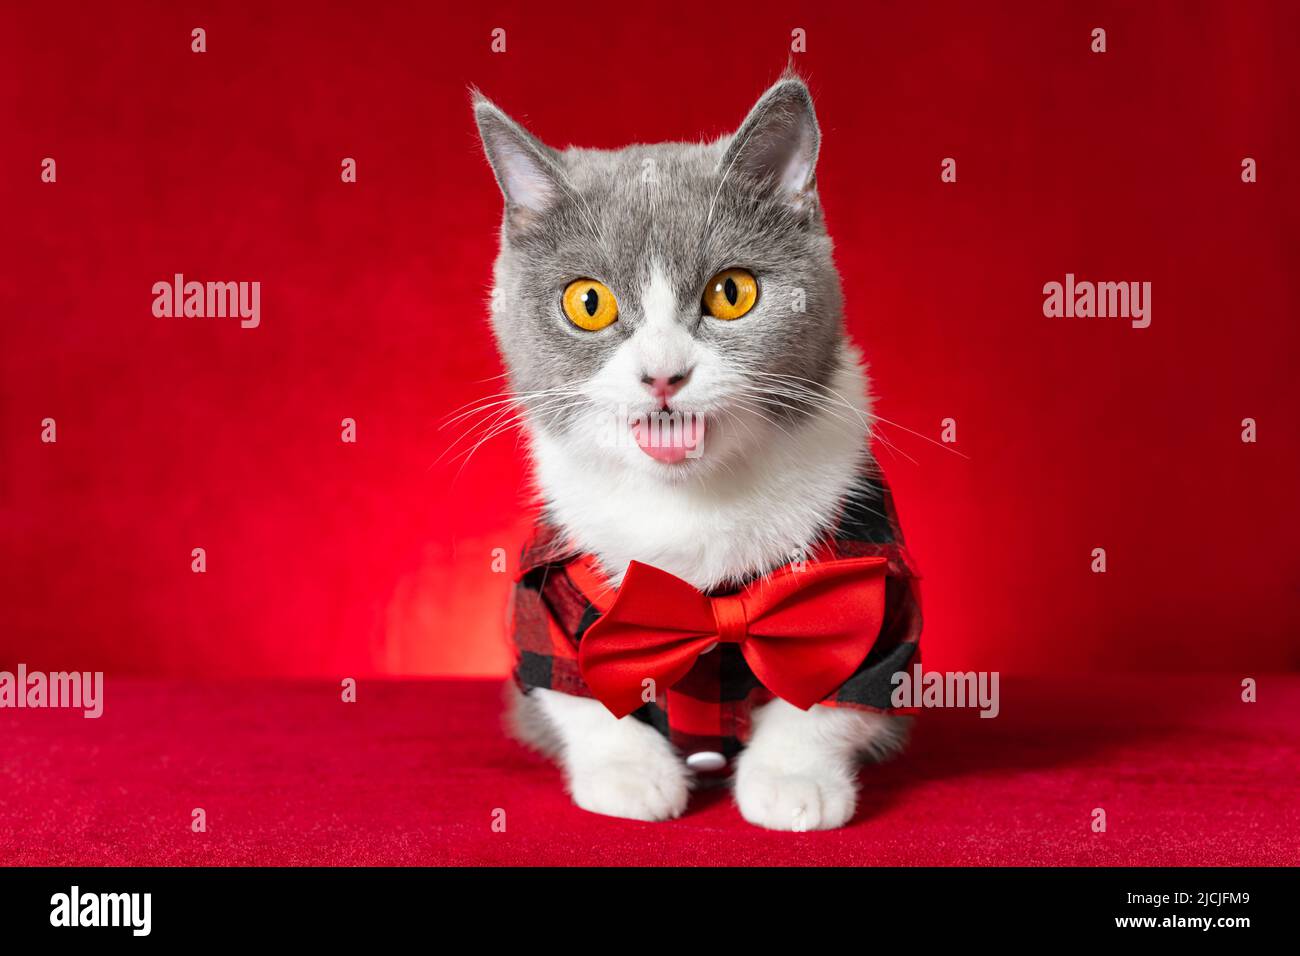 a cute british shorthair cat wearing plaid shirt with bow tie with ...